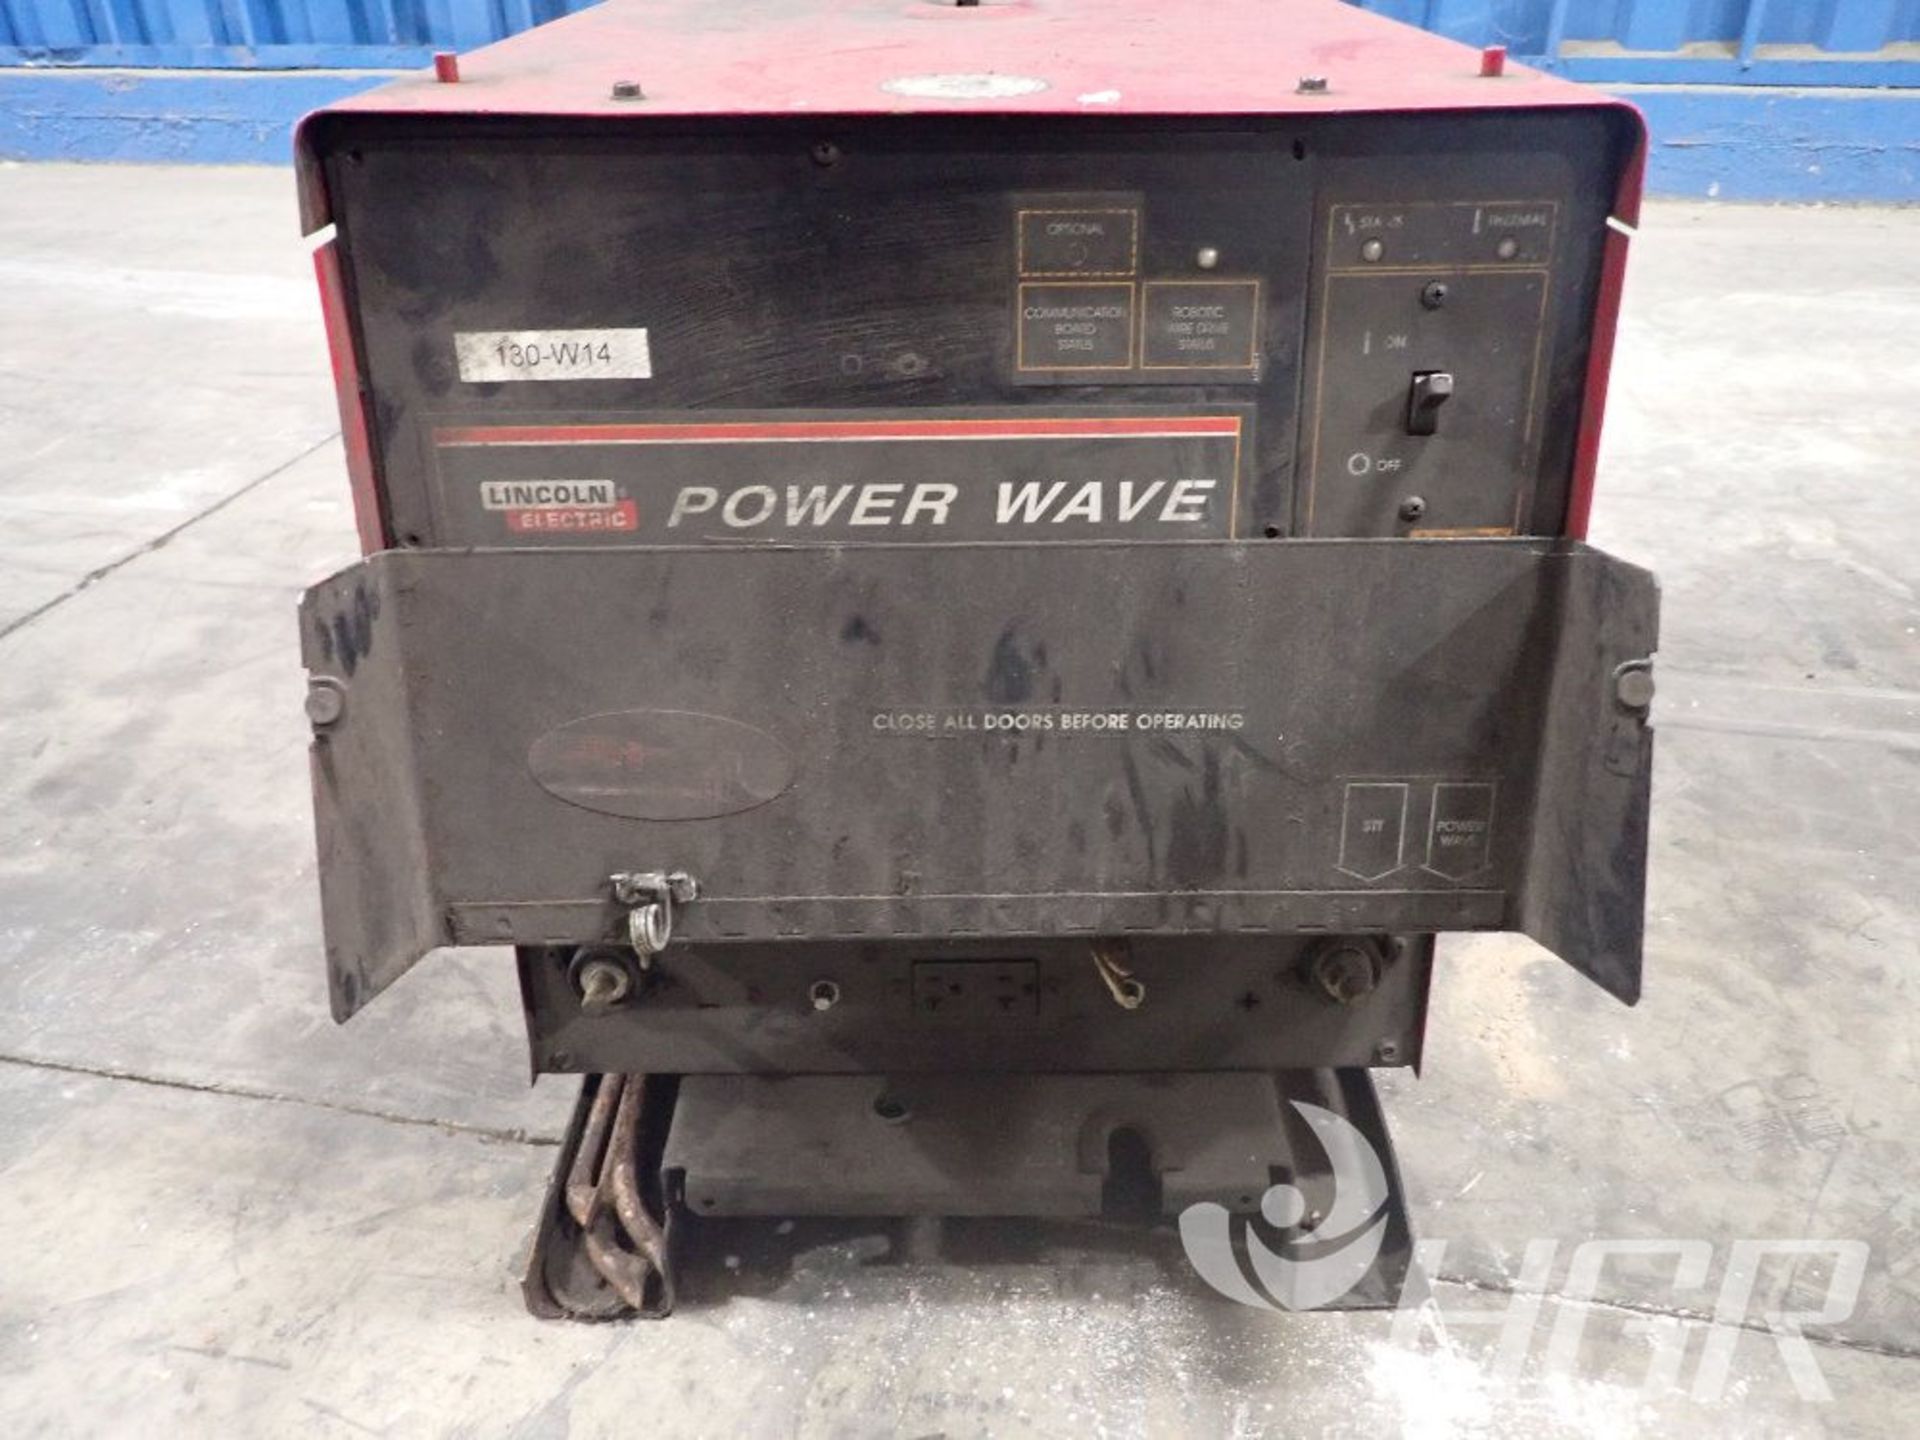 LINCOLN ELECTRIC WELDING MACHINE, Model POWER WAVE, Date: n/a; s/n n/a, Approx. Capacity: n/a, - Image 3 of 7